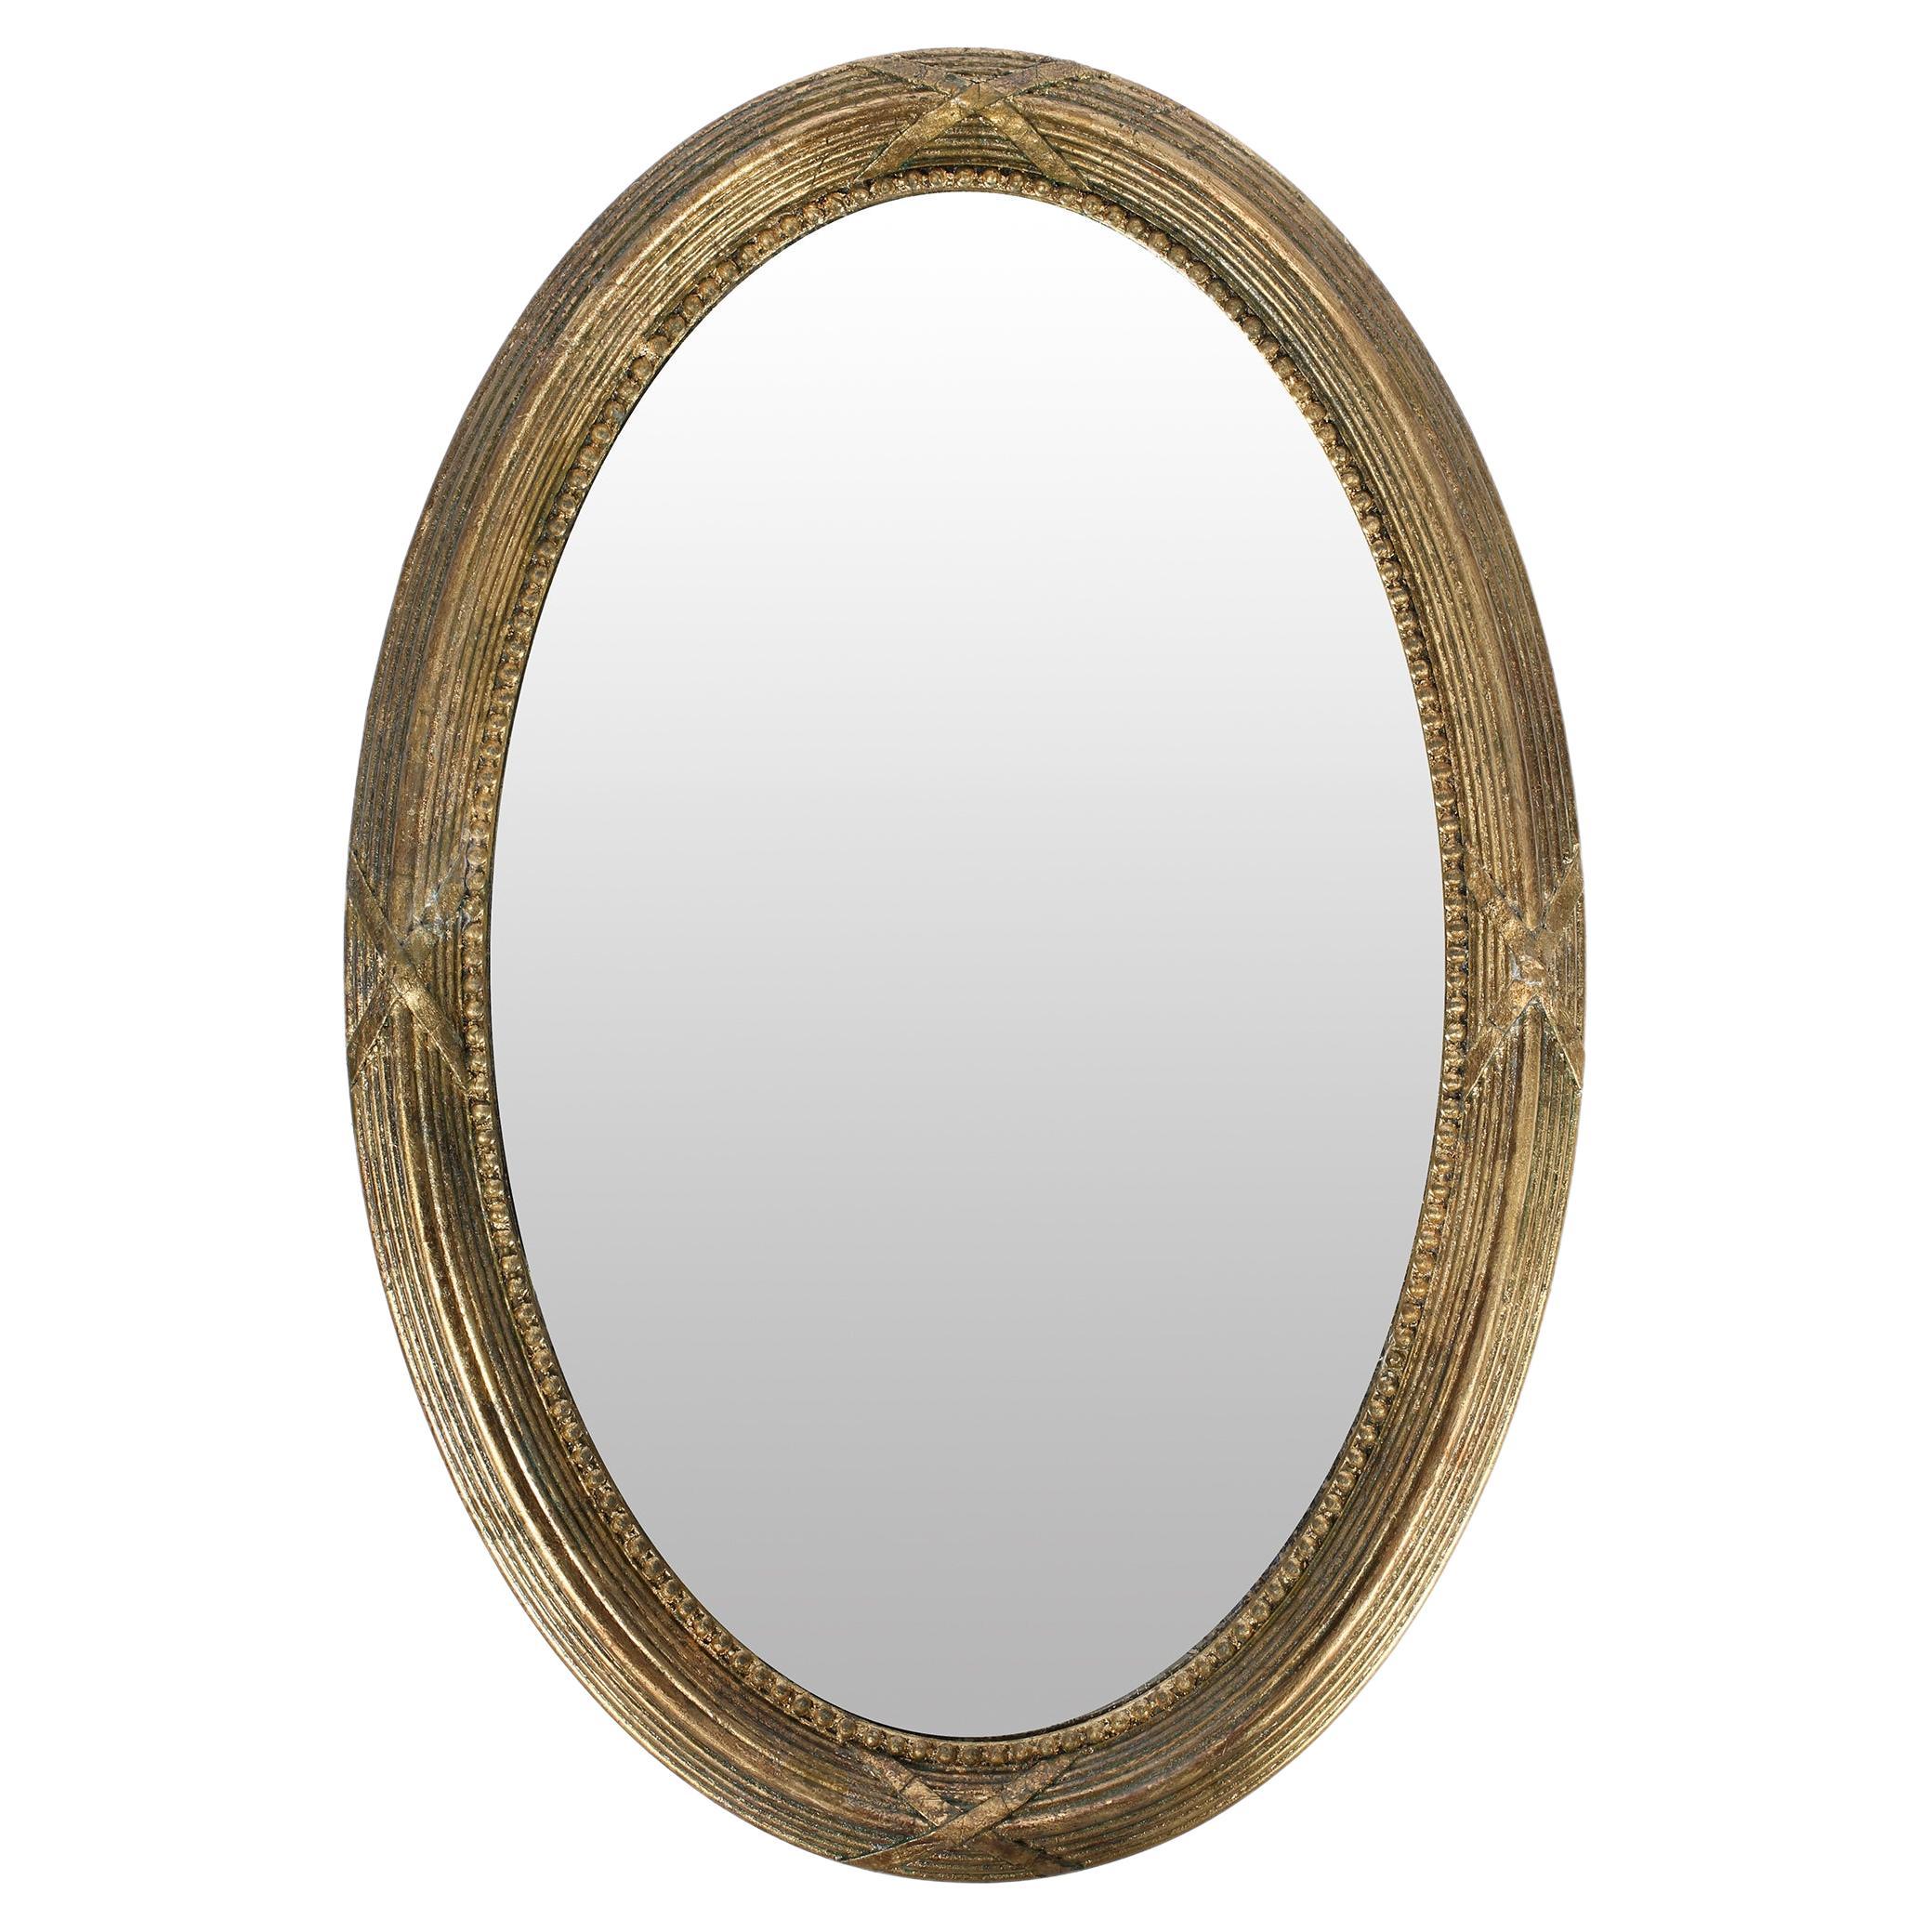 English Victorian Period Gilt Oval Carved Gesso Wall Mirror For Sale